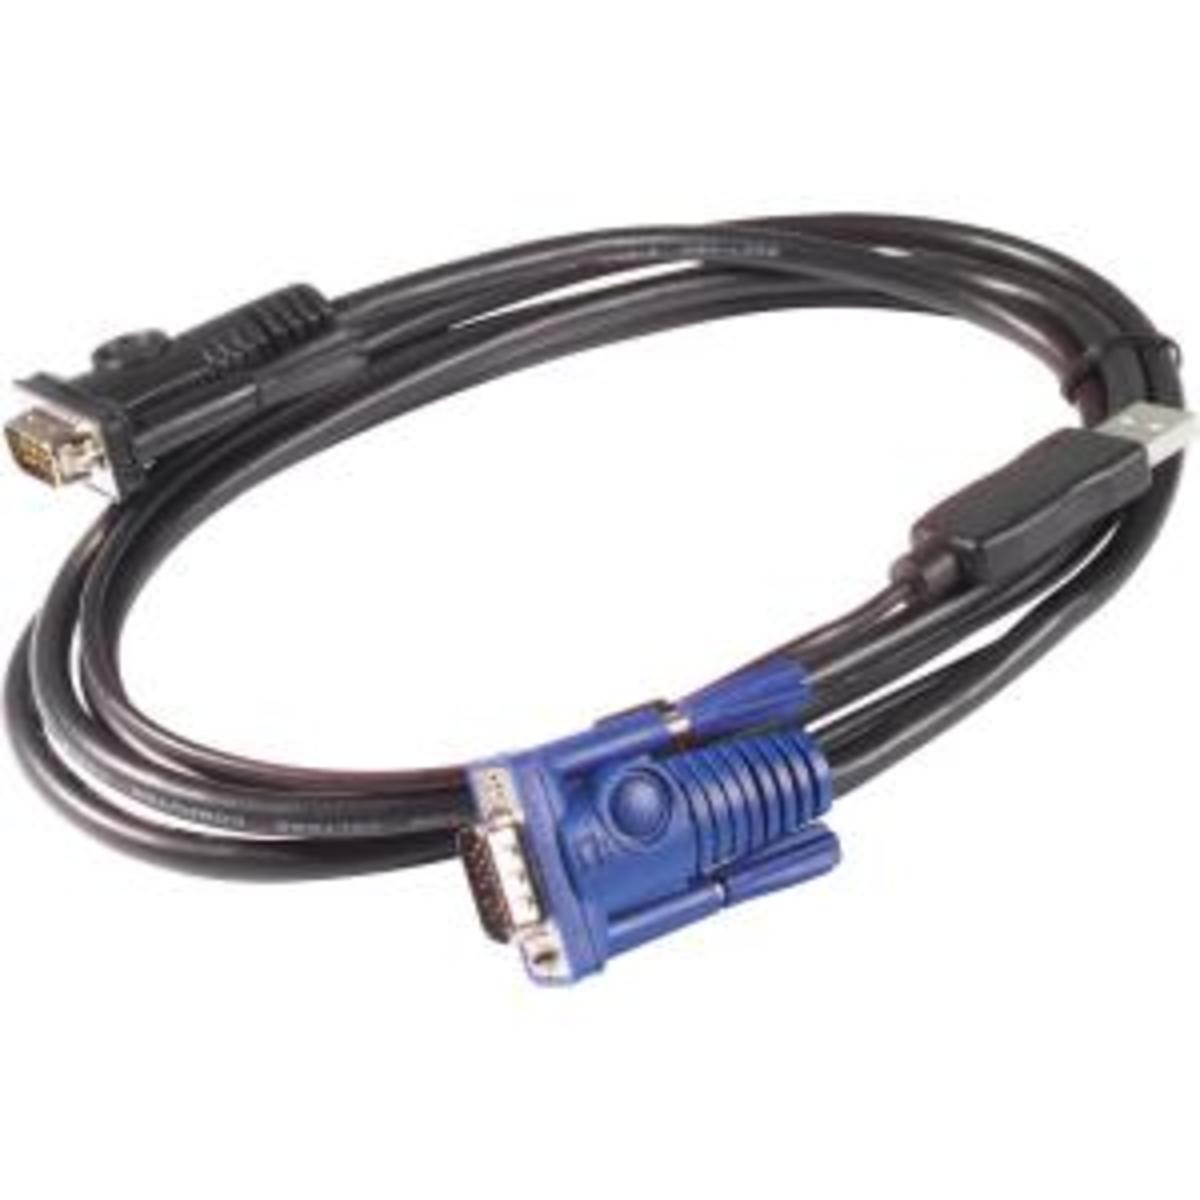 KVM USB Cable - 6 ft or 1.8 m